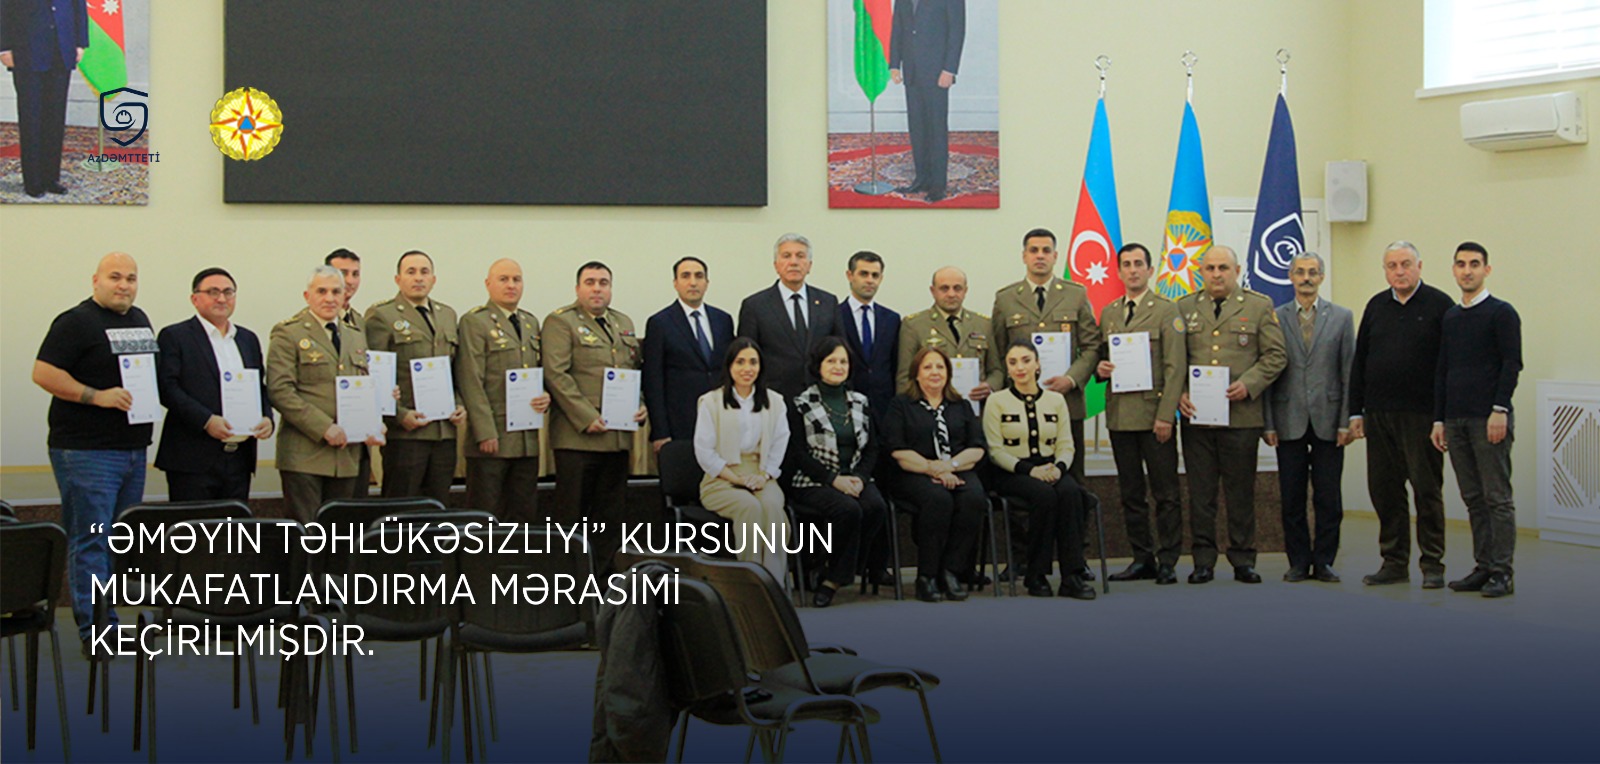 Award ceremony of" Occupational Safety " Course was held